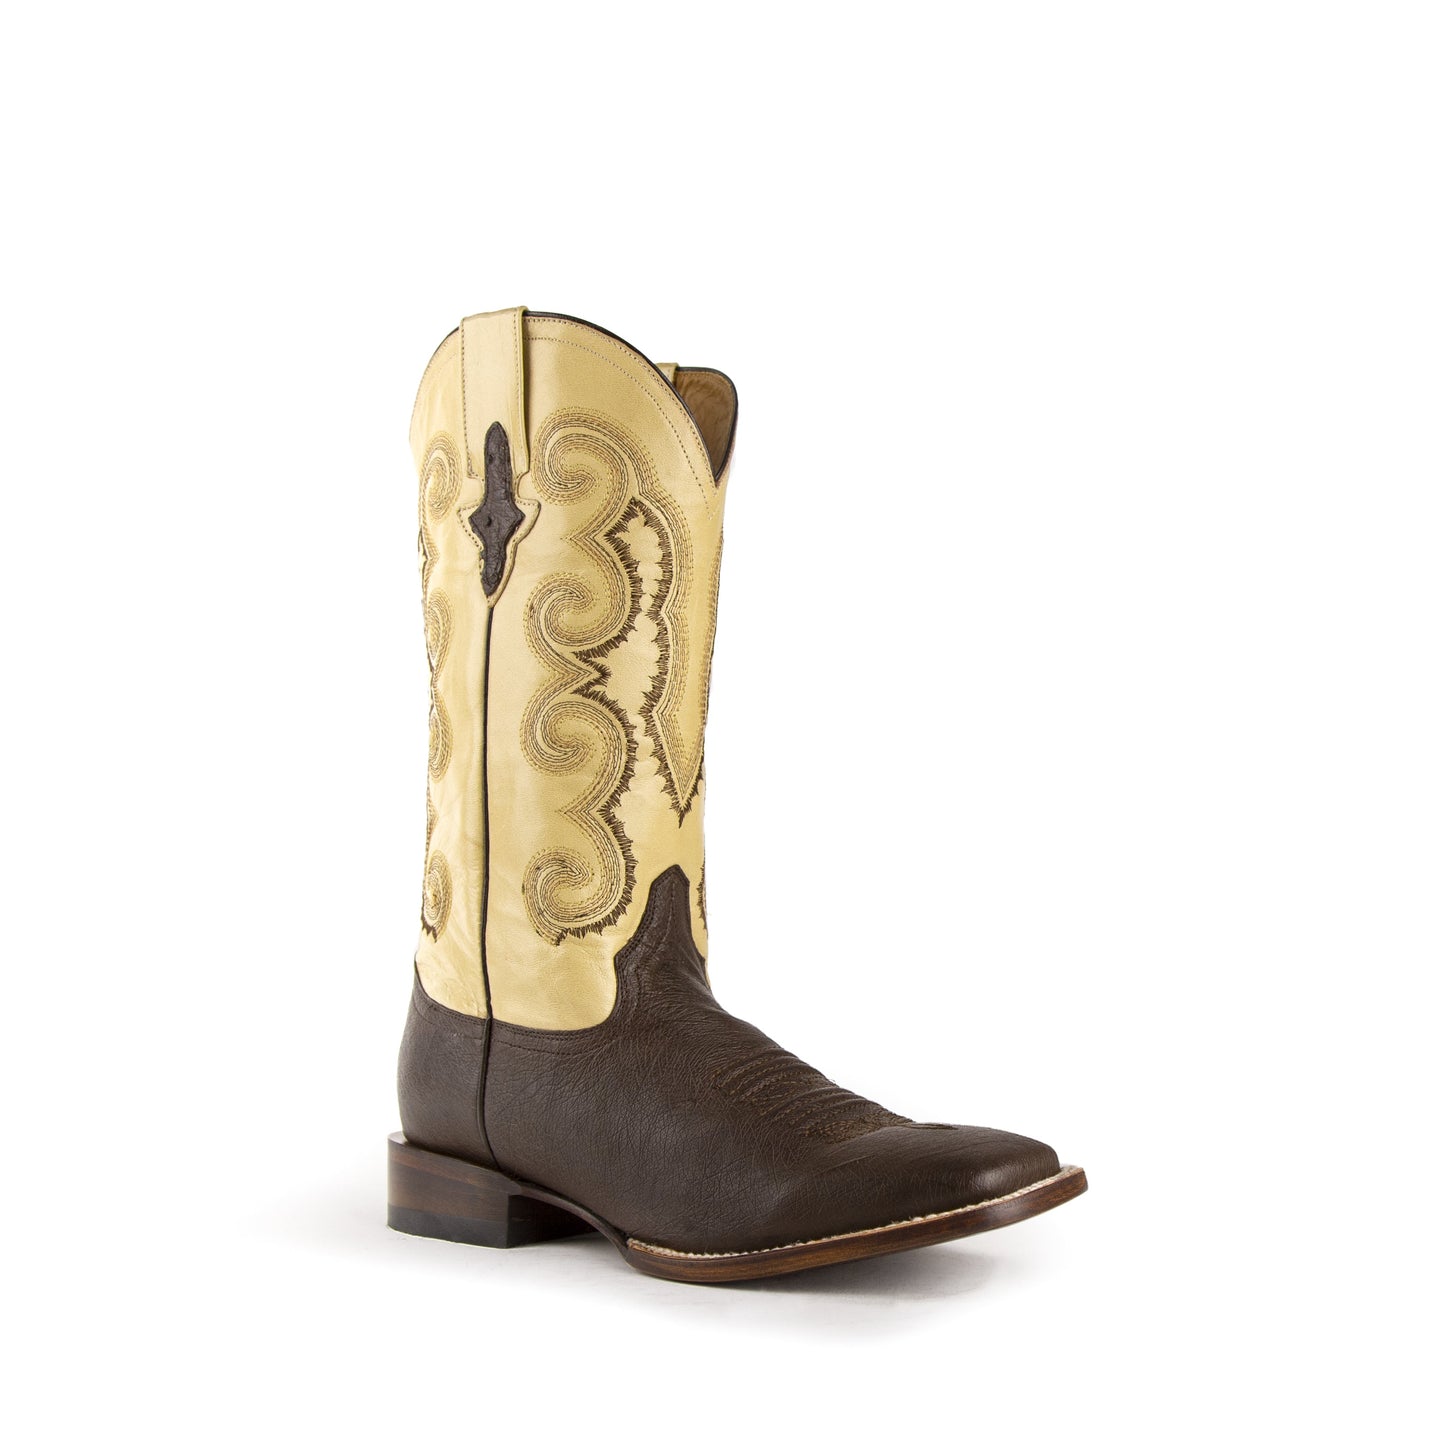 FERRINI MORGAN CHOCOLATE SMOOTH QUILL OSTRICH BOOT